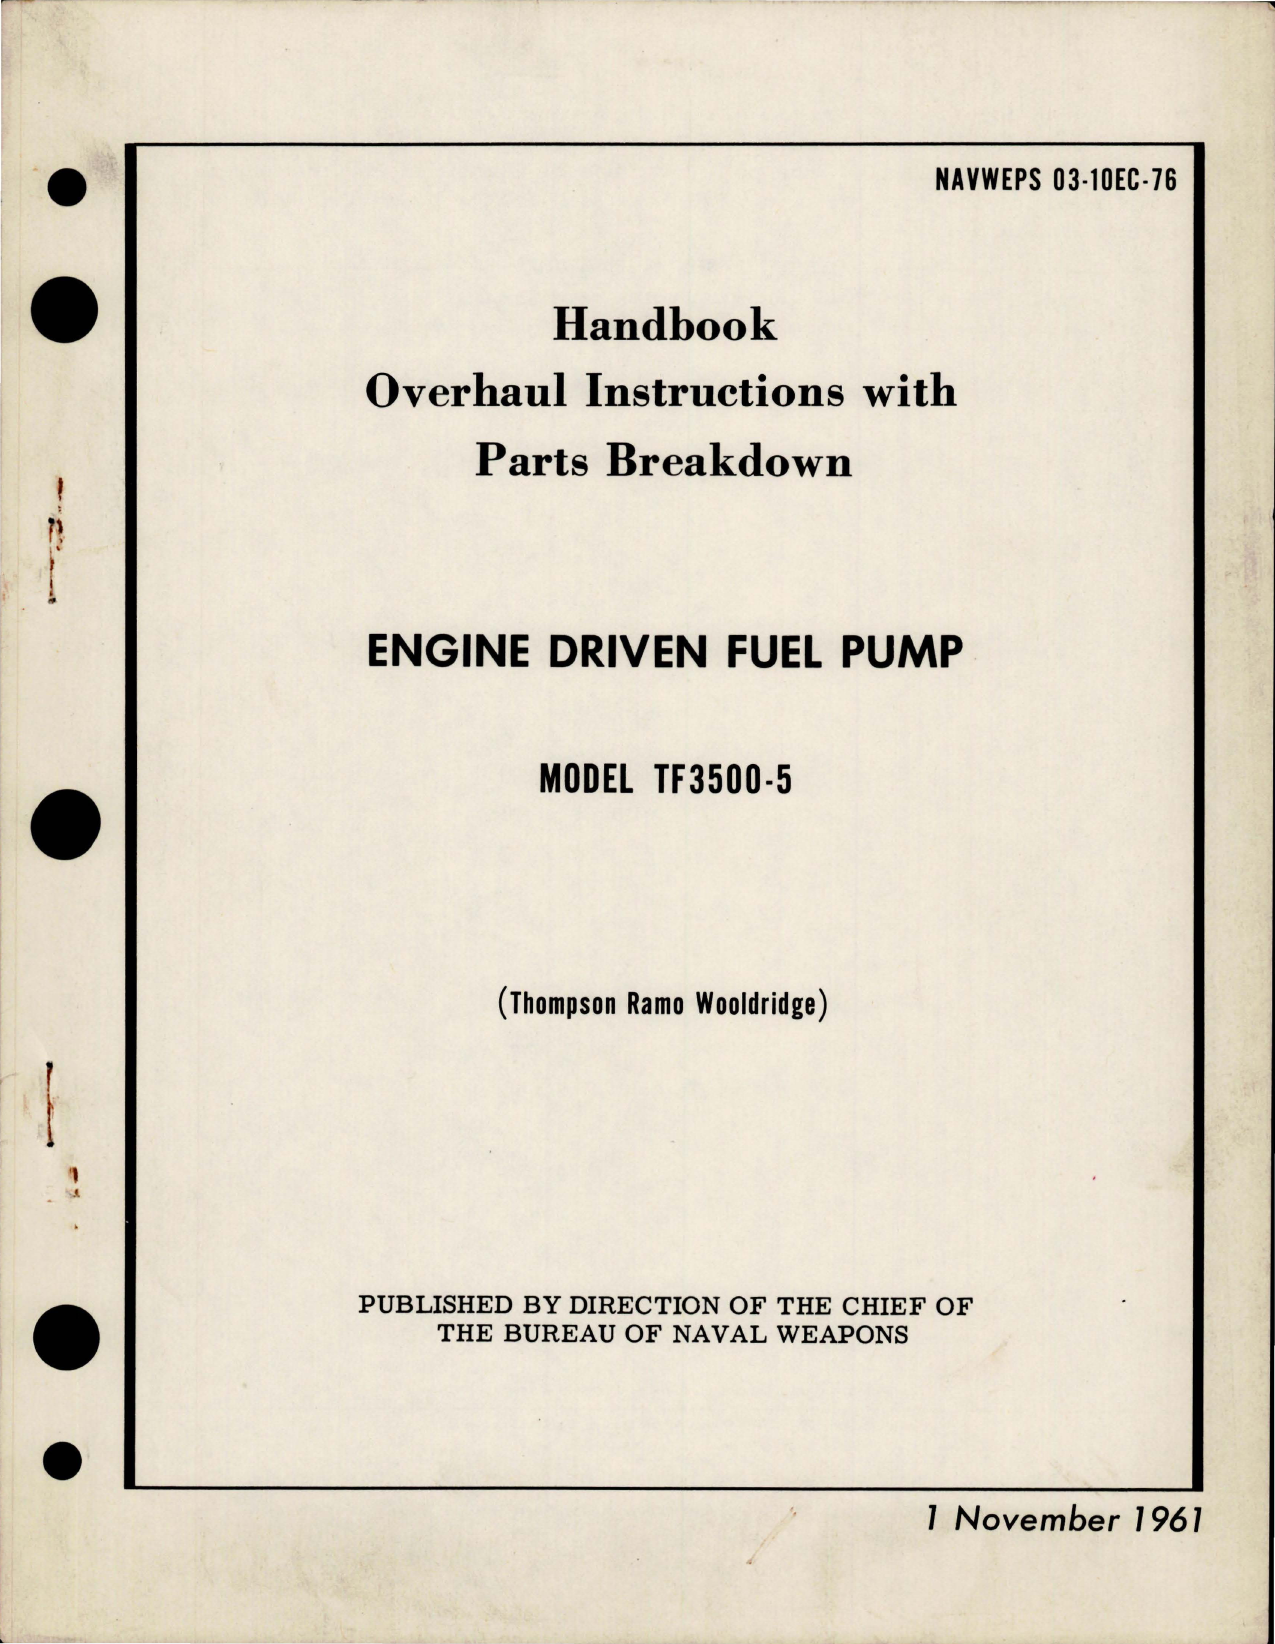 Sample page 1 from AirCorps Library document: Overhaul Instructions with Parts Breakdown for Engine Driven Fuel Pump - Model TF3500-5 